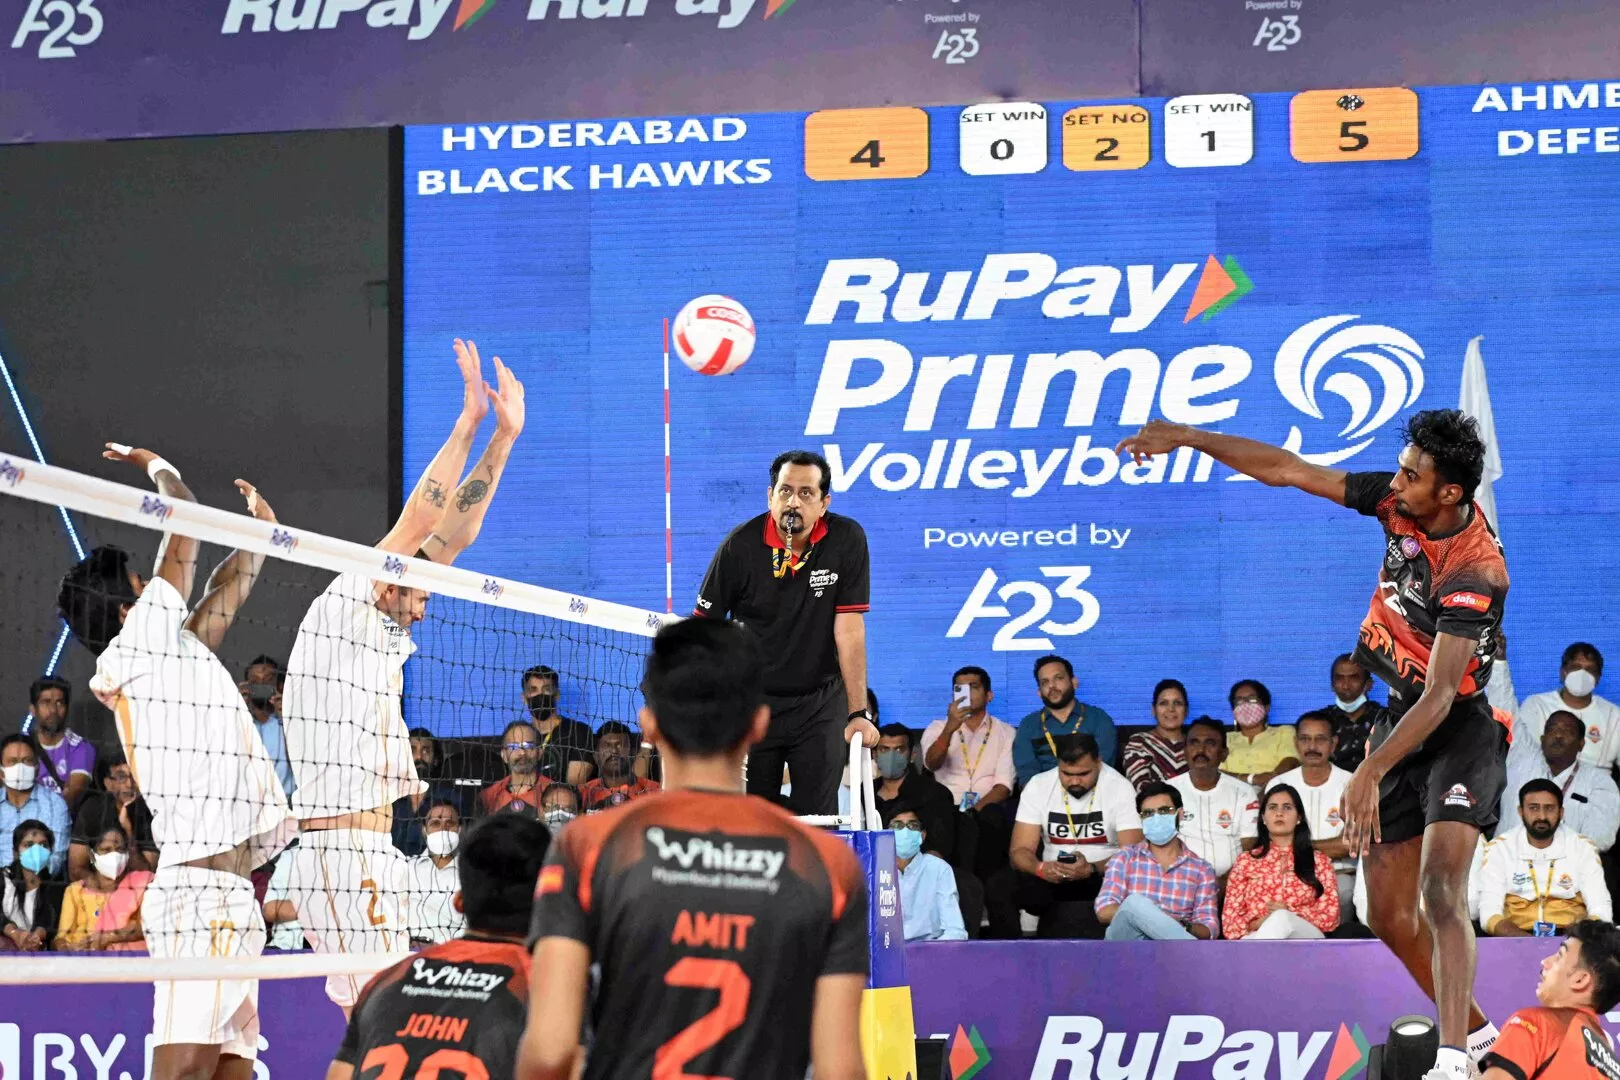 Season 2 of Prime Volleyball League will begin on February 4